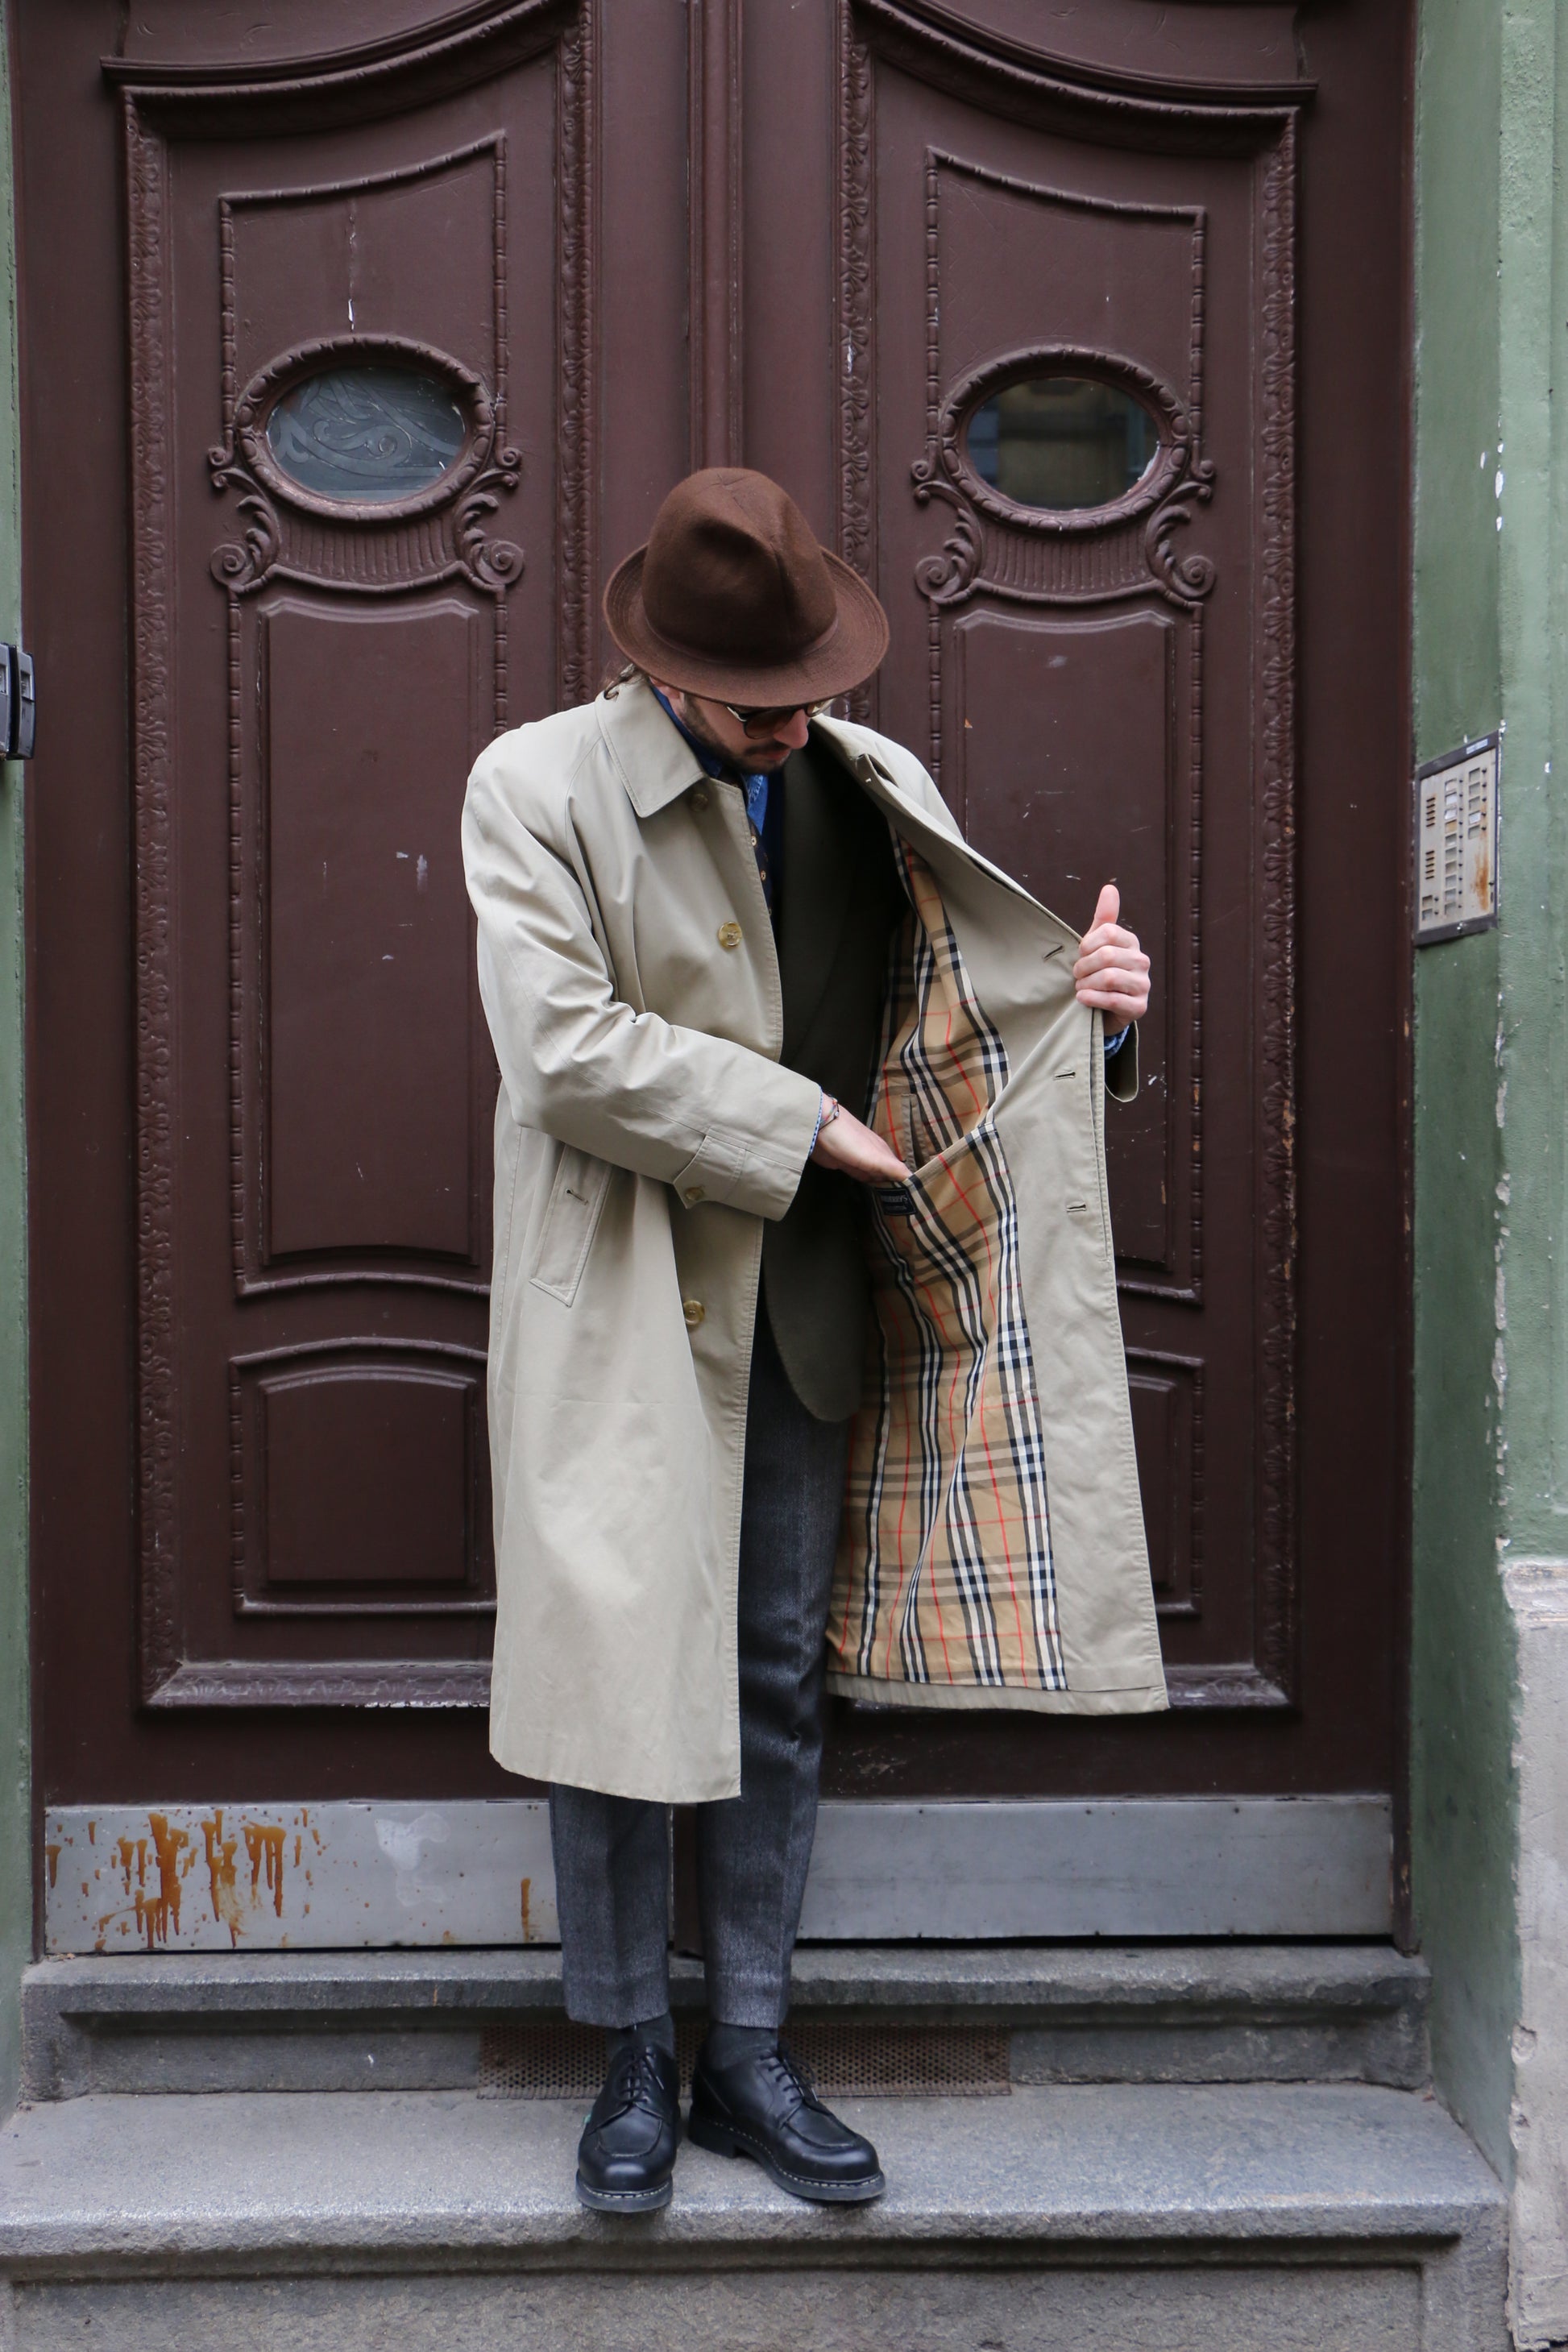 Burberry Trench Coat ~ Vintage Store